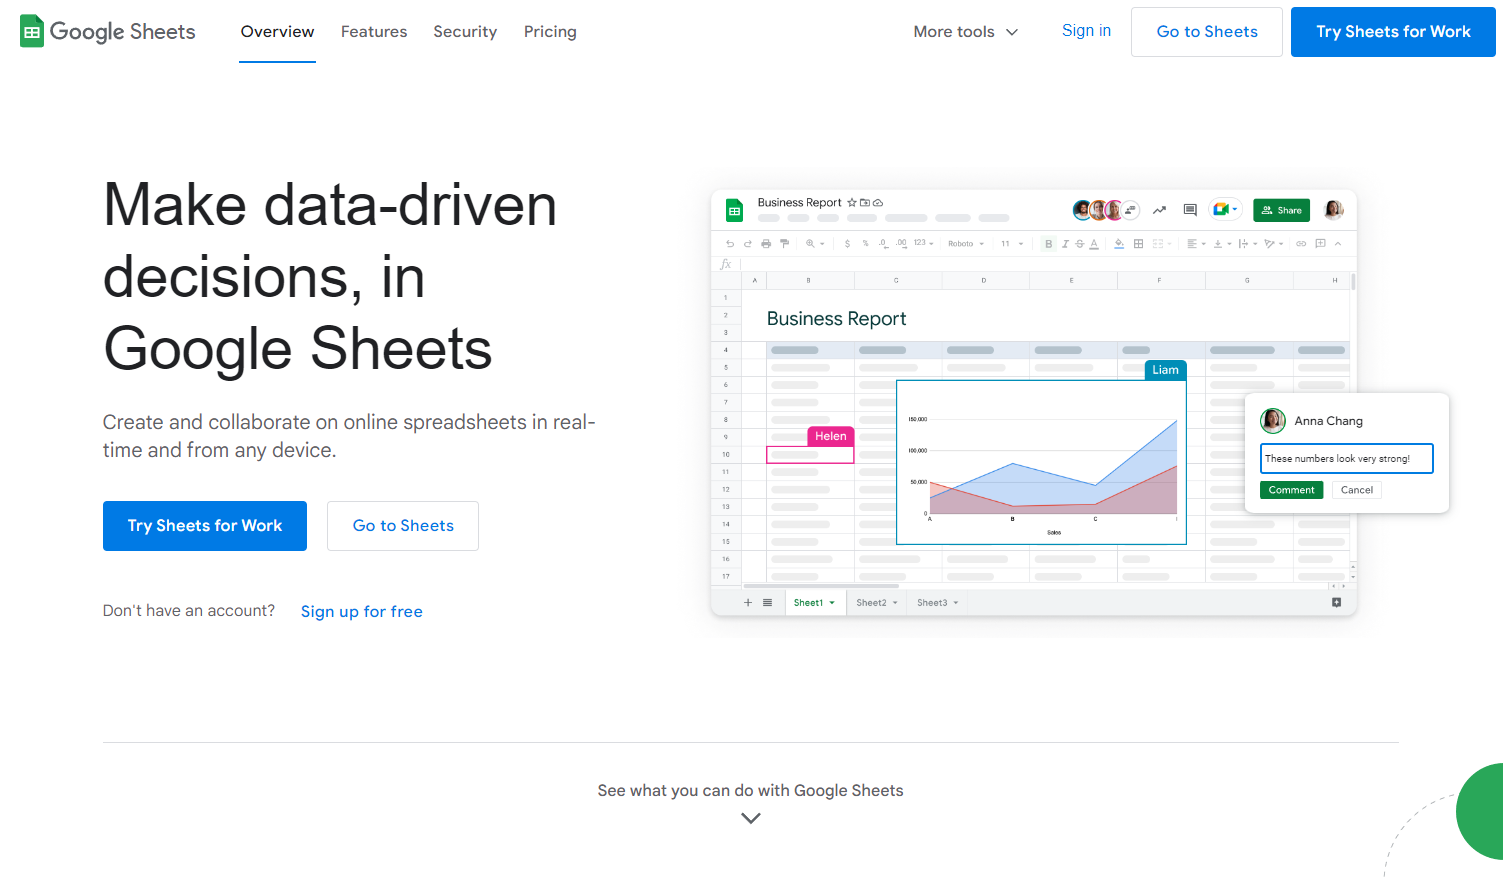 Image alt: Google Sheets can help you make better informed business decisions for free.